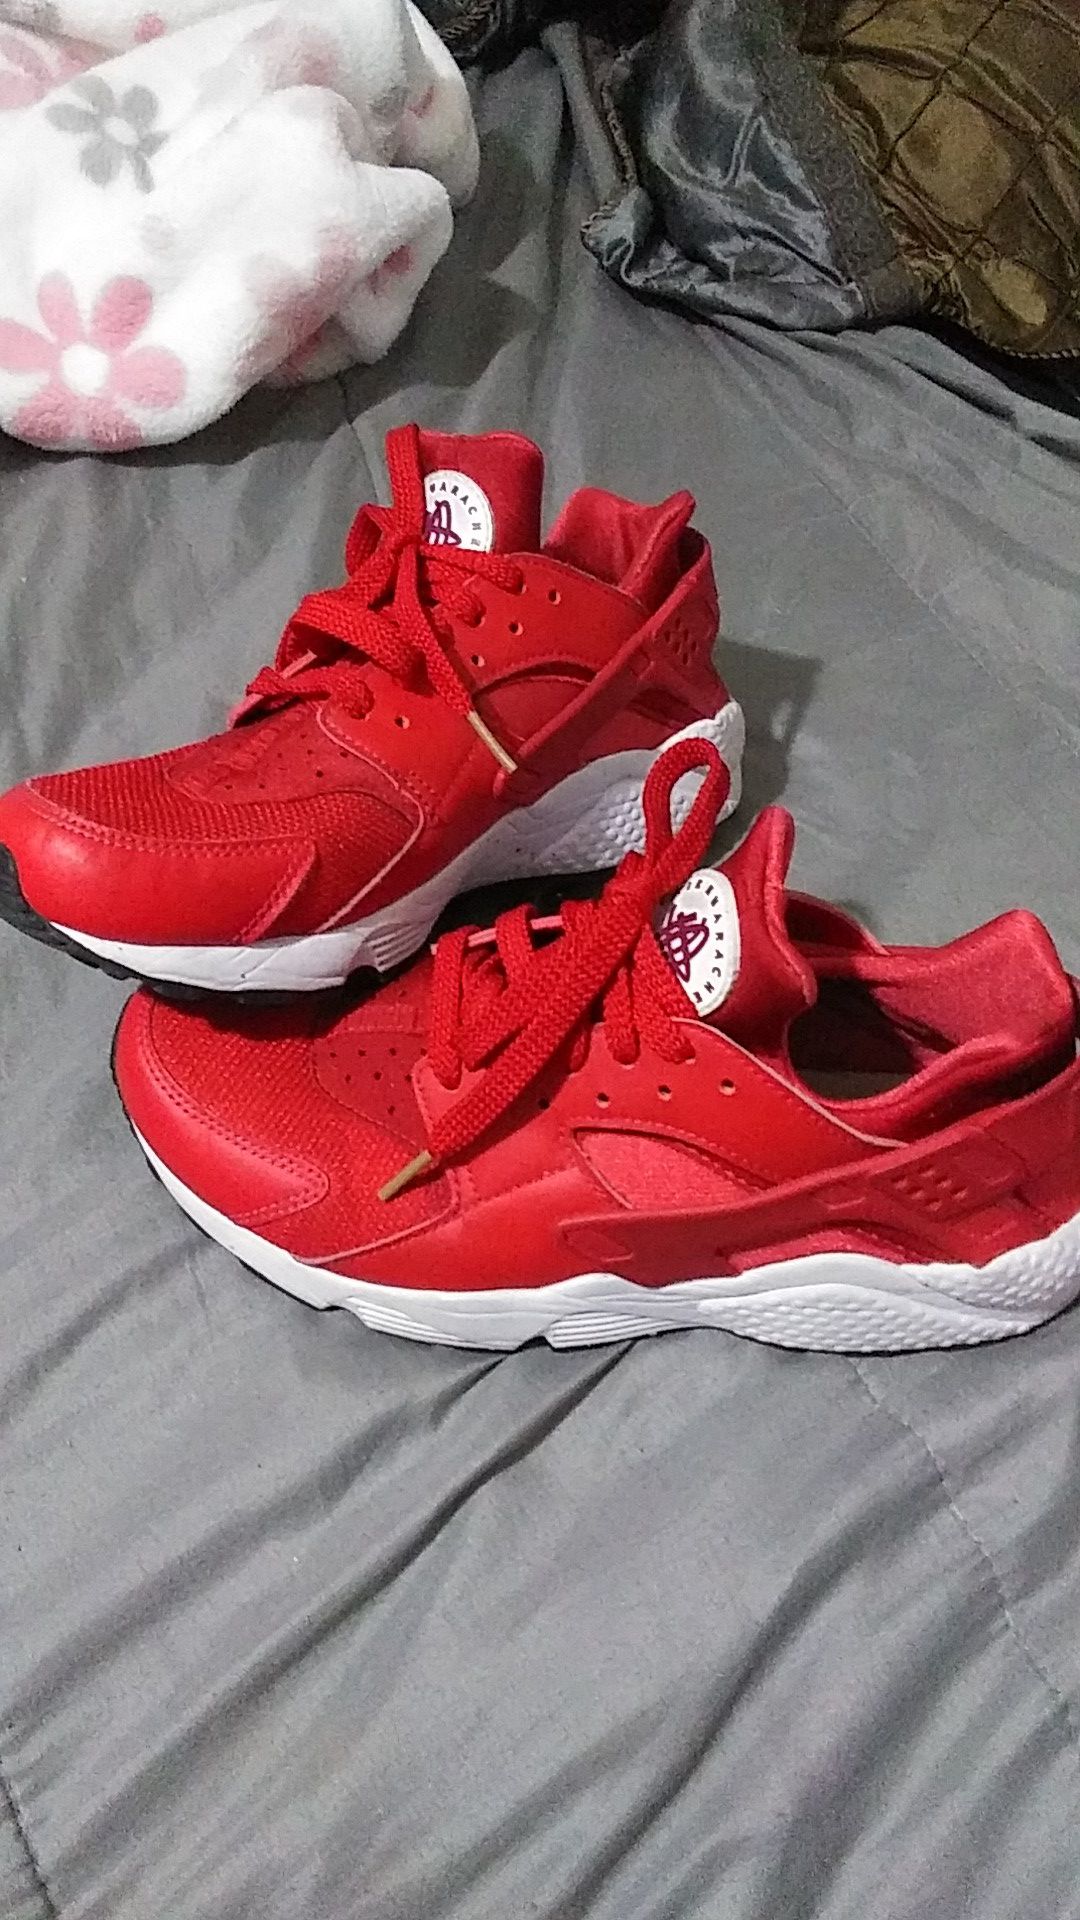 Red and white Nike Air Hurraches